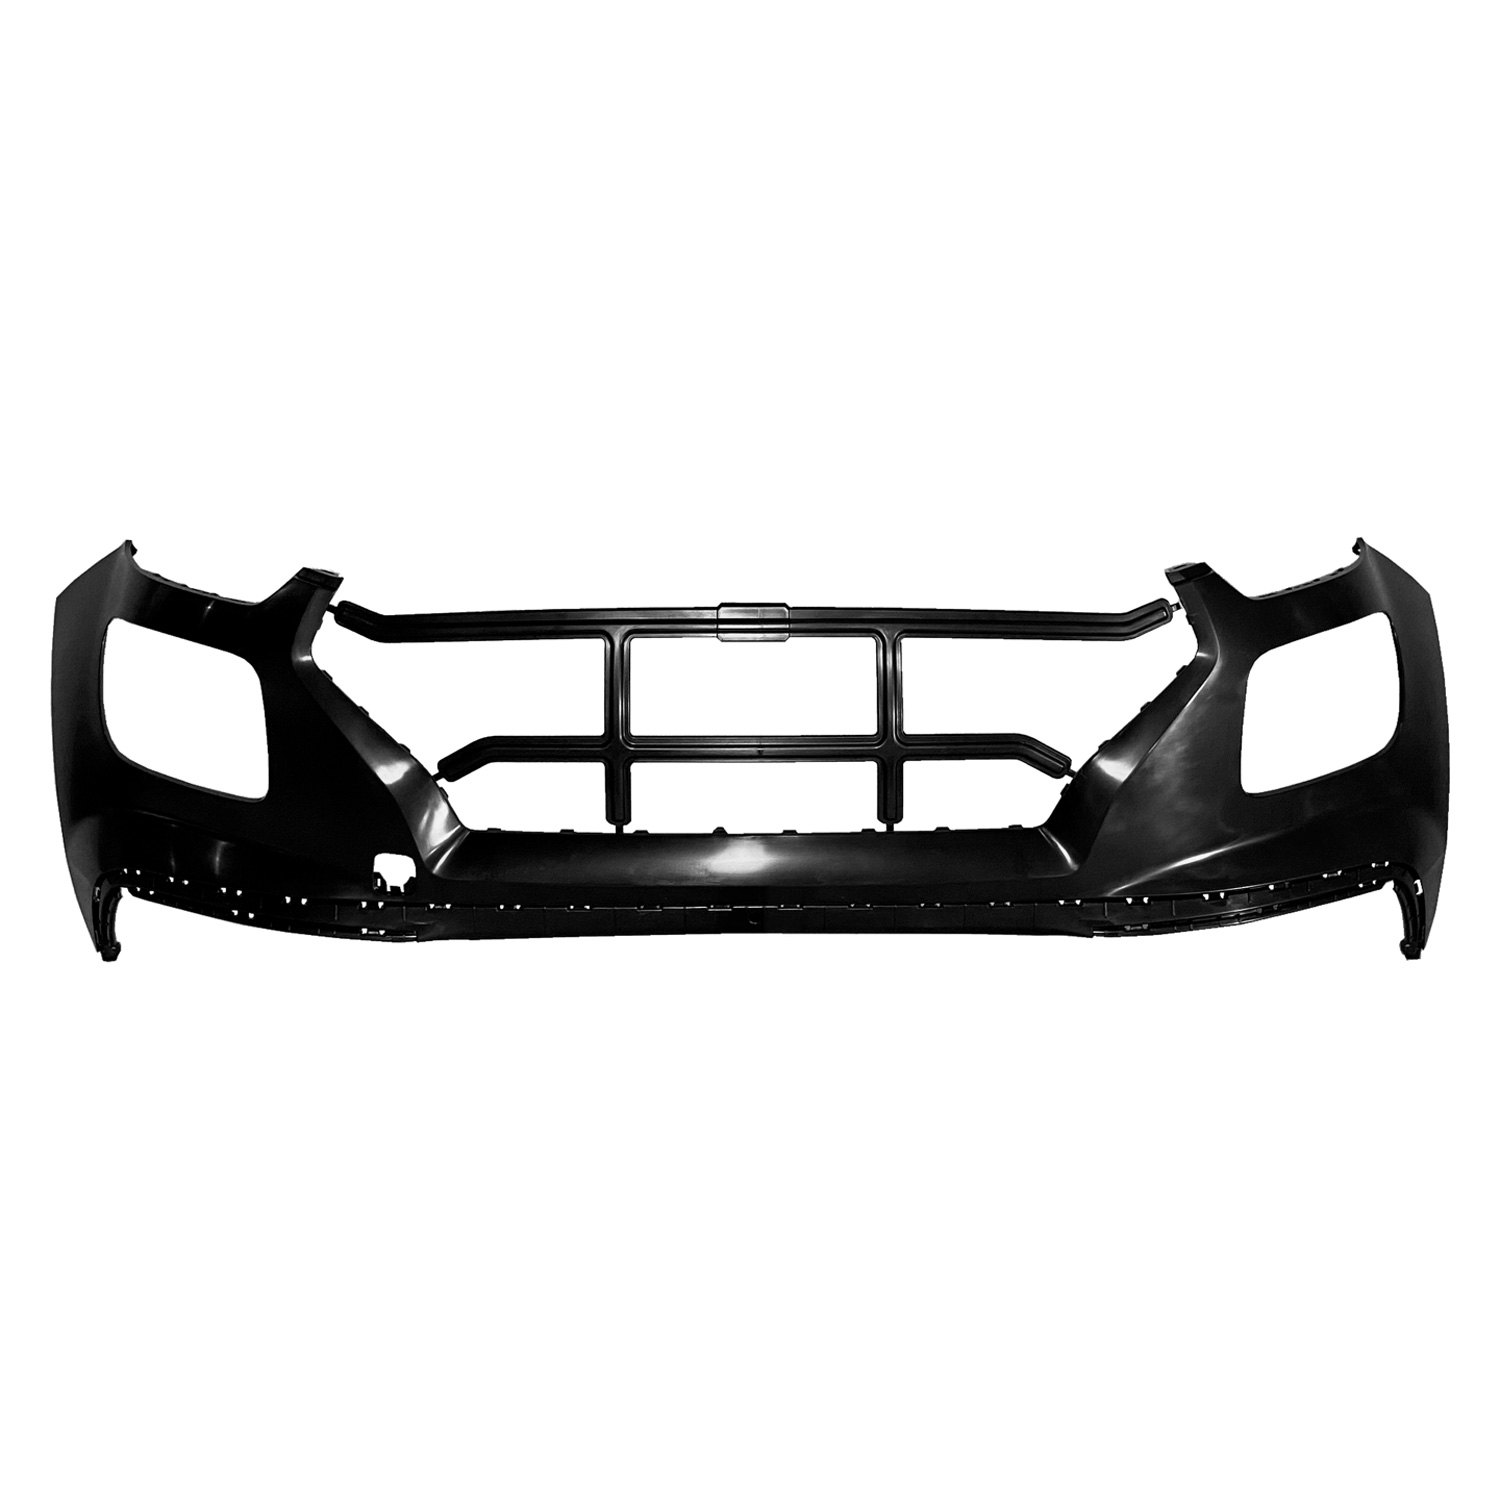 Replace® Hy1014103 Front Upper Bumper Cover Standard Line 3949